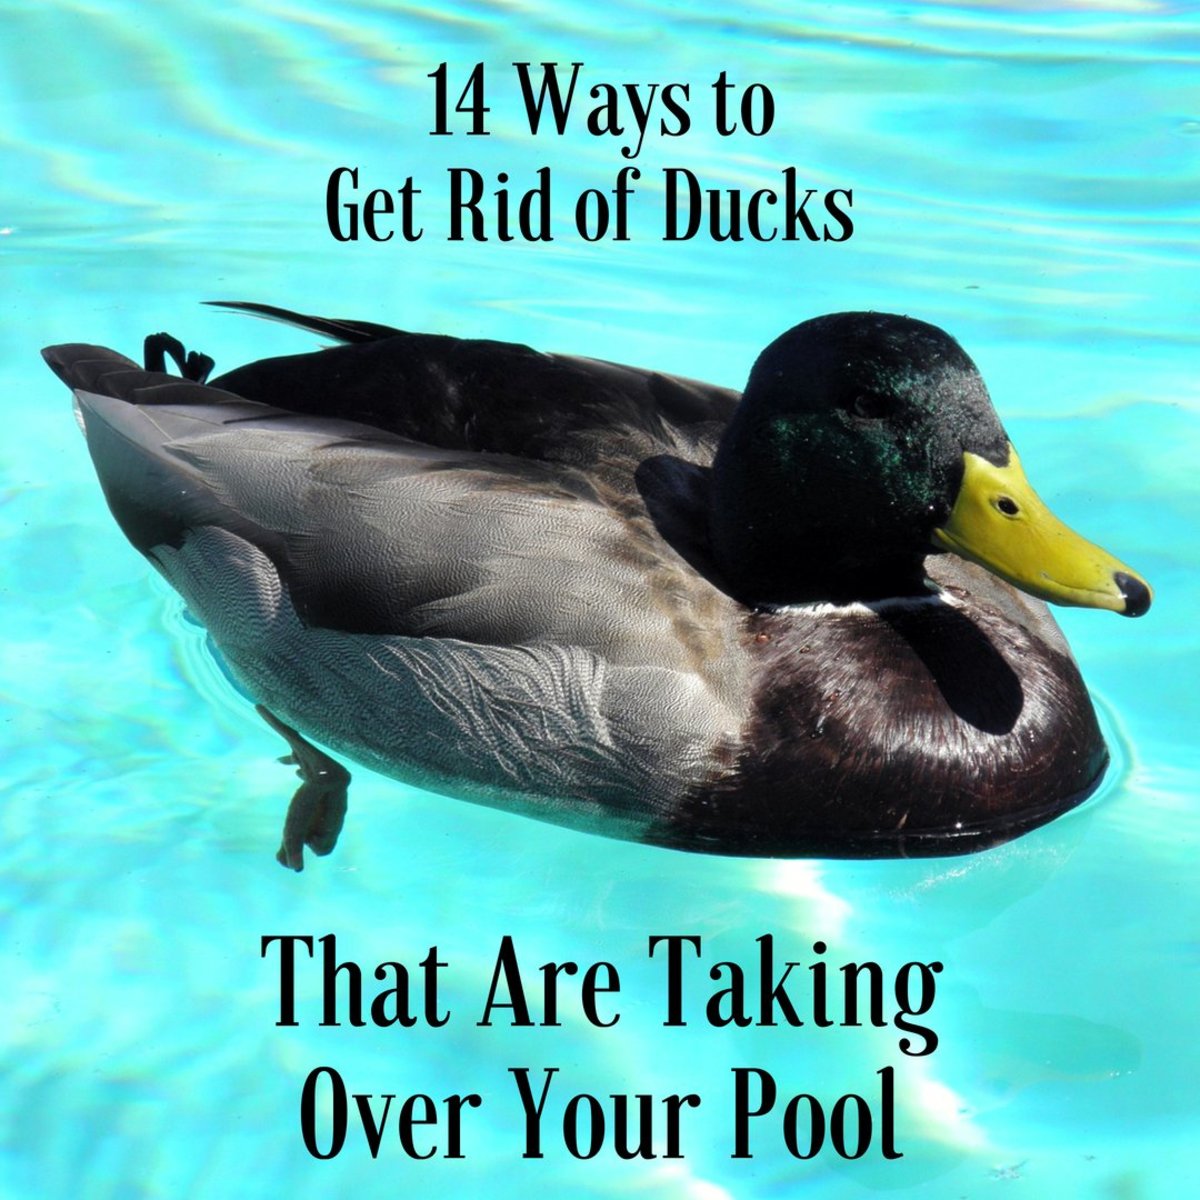 Most of these tips are not only effective, but they're cost efficient too. You shouldn't have to break the bank to take back your pool. 